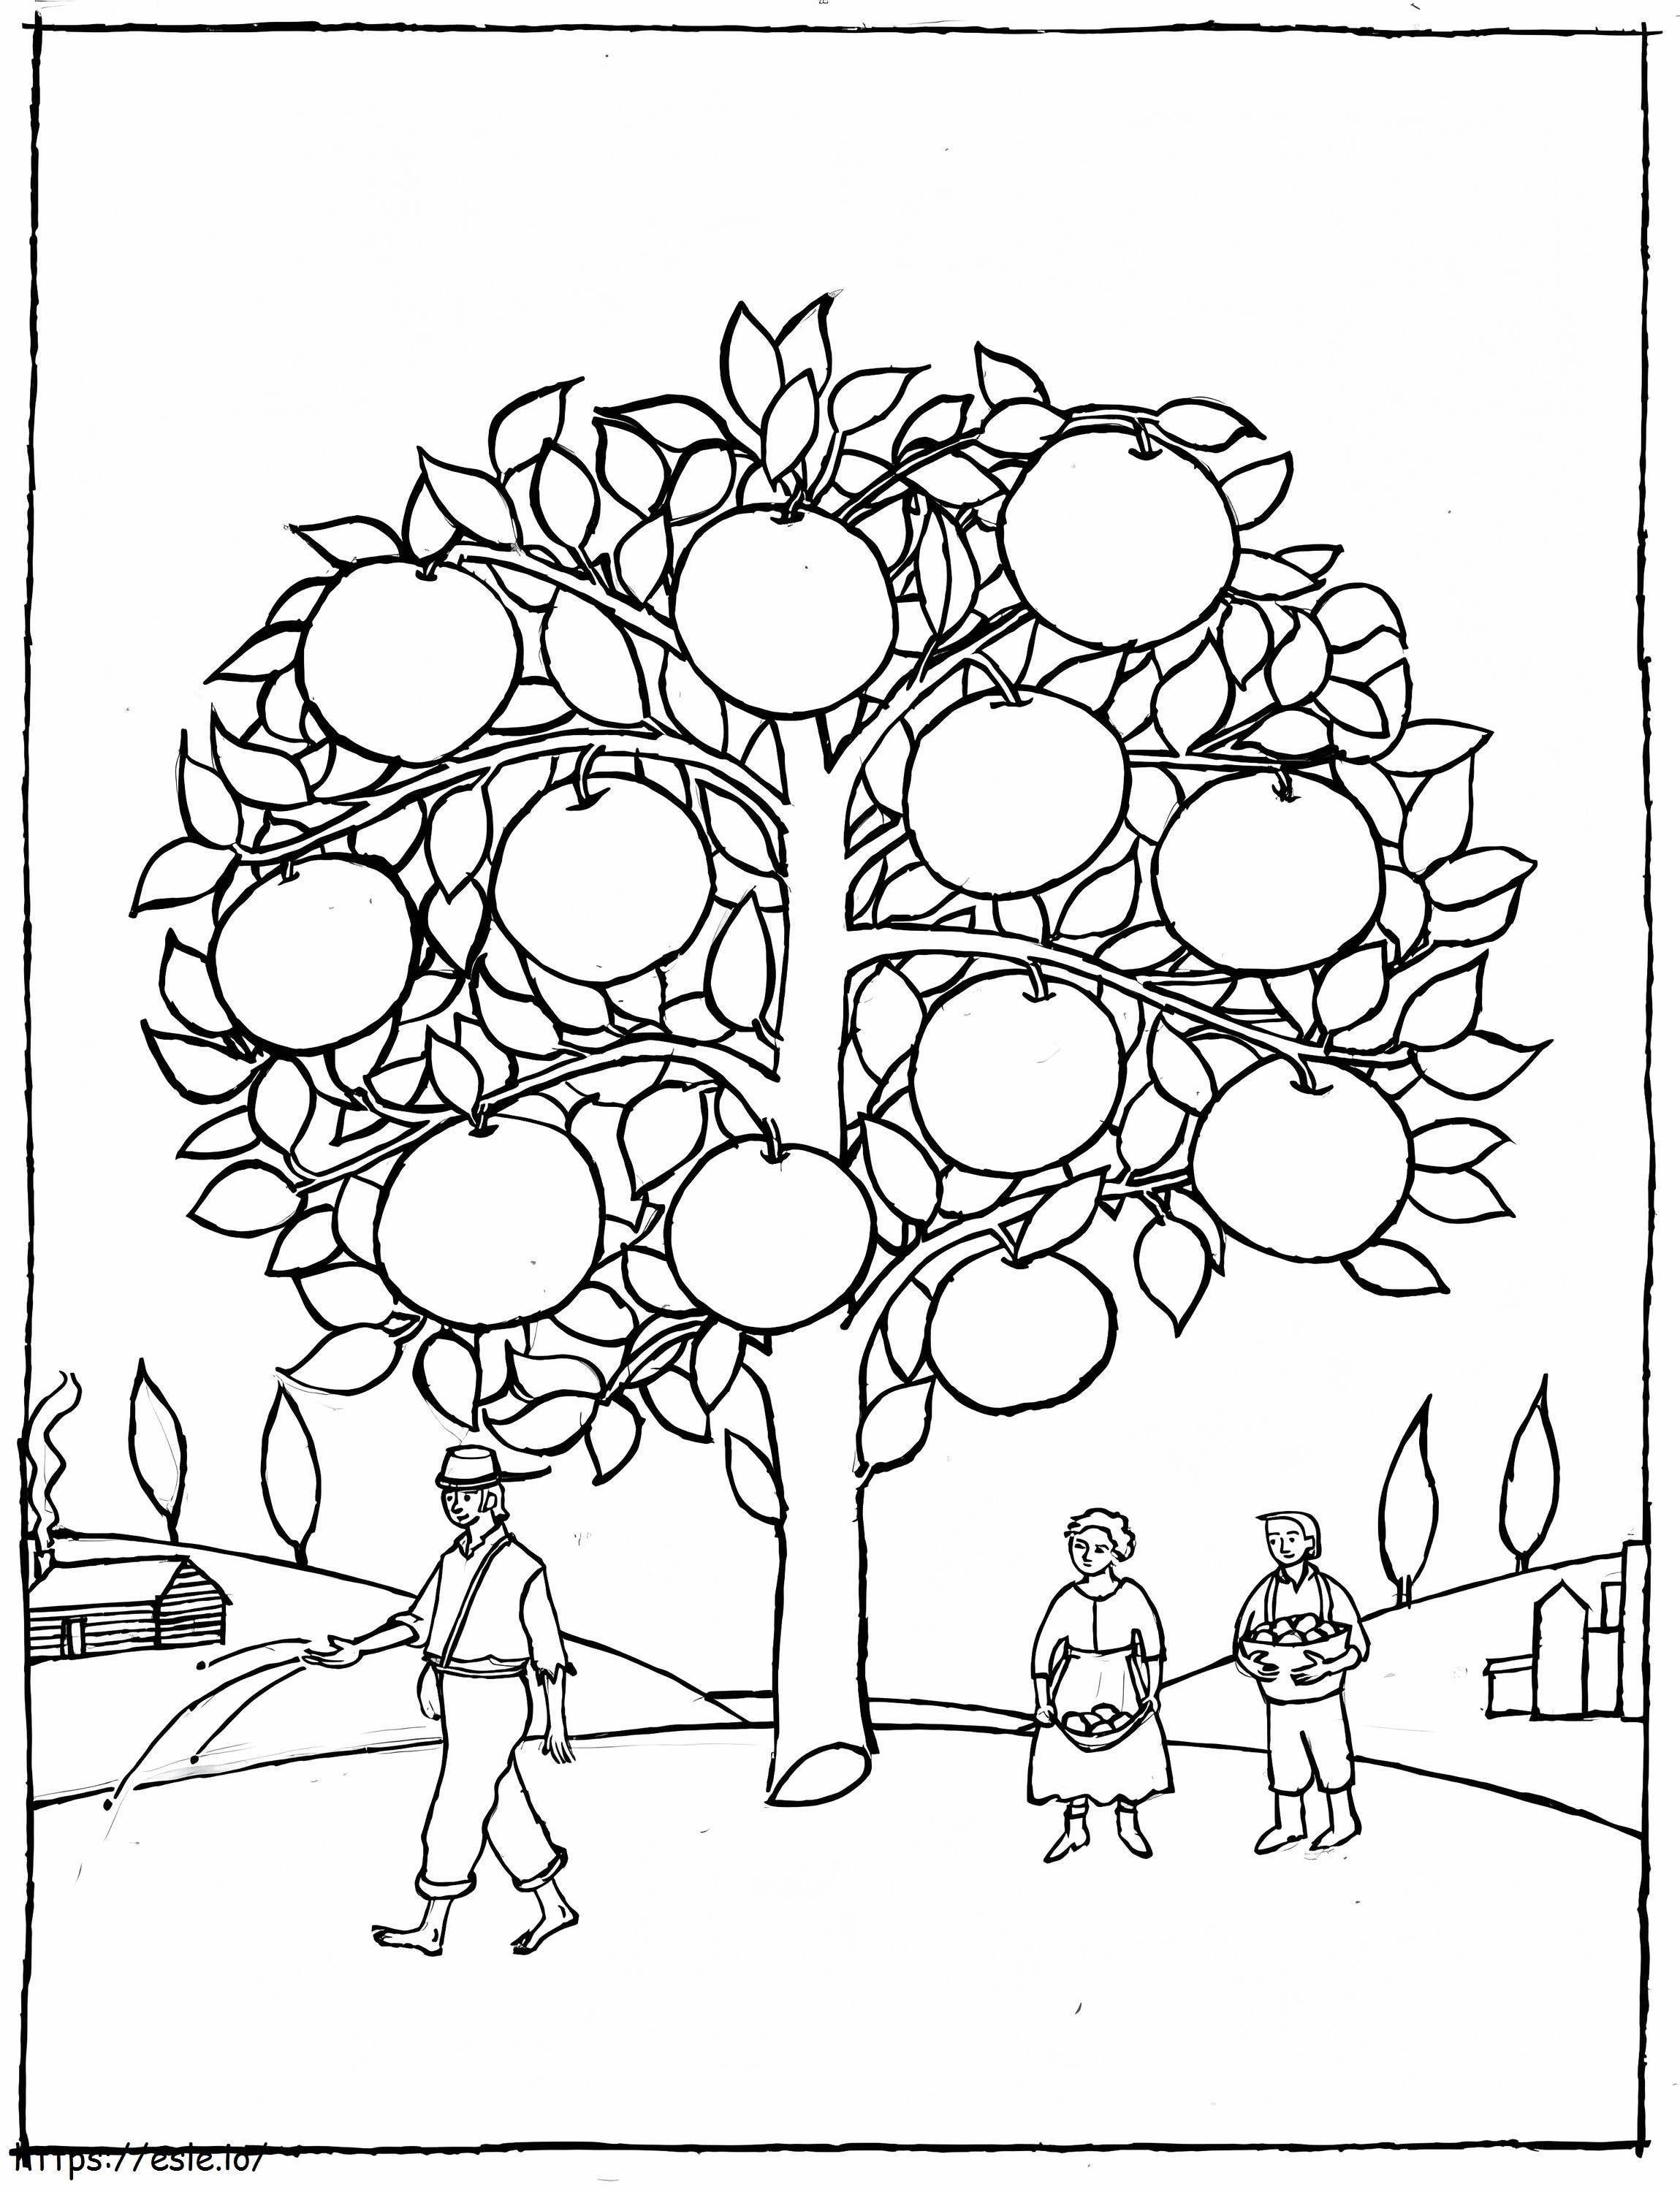 Johnny Appleseed And Apple Tree coloring page